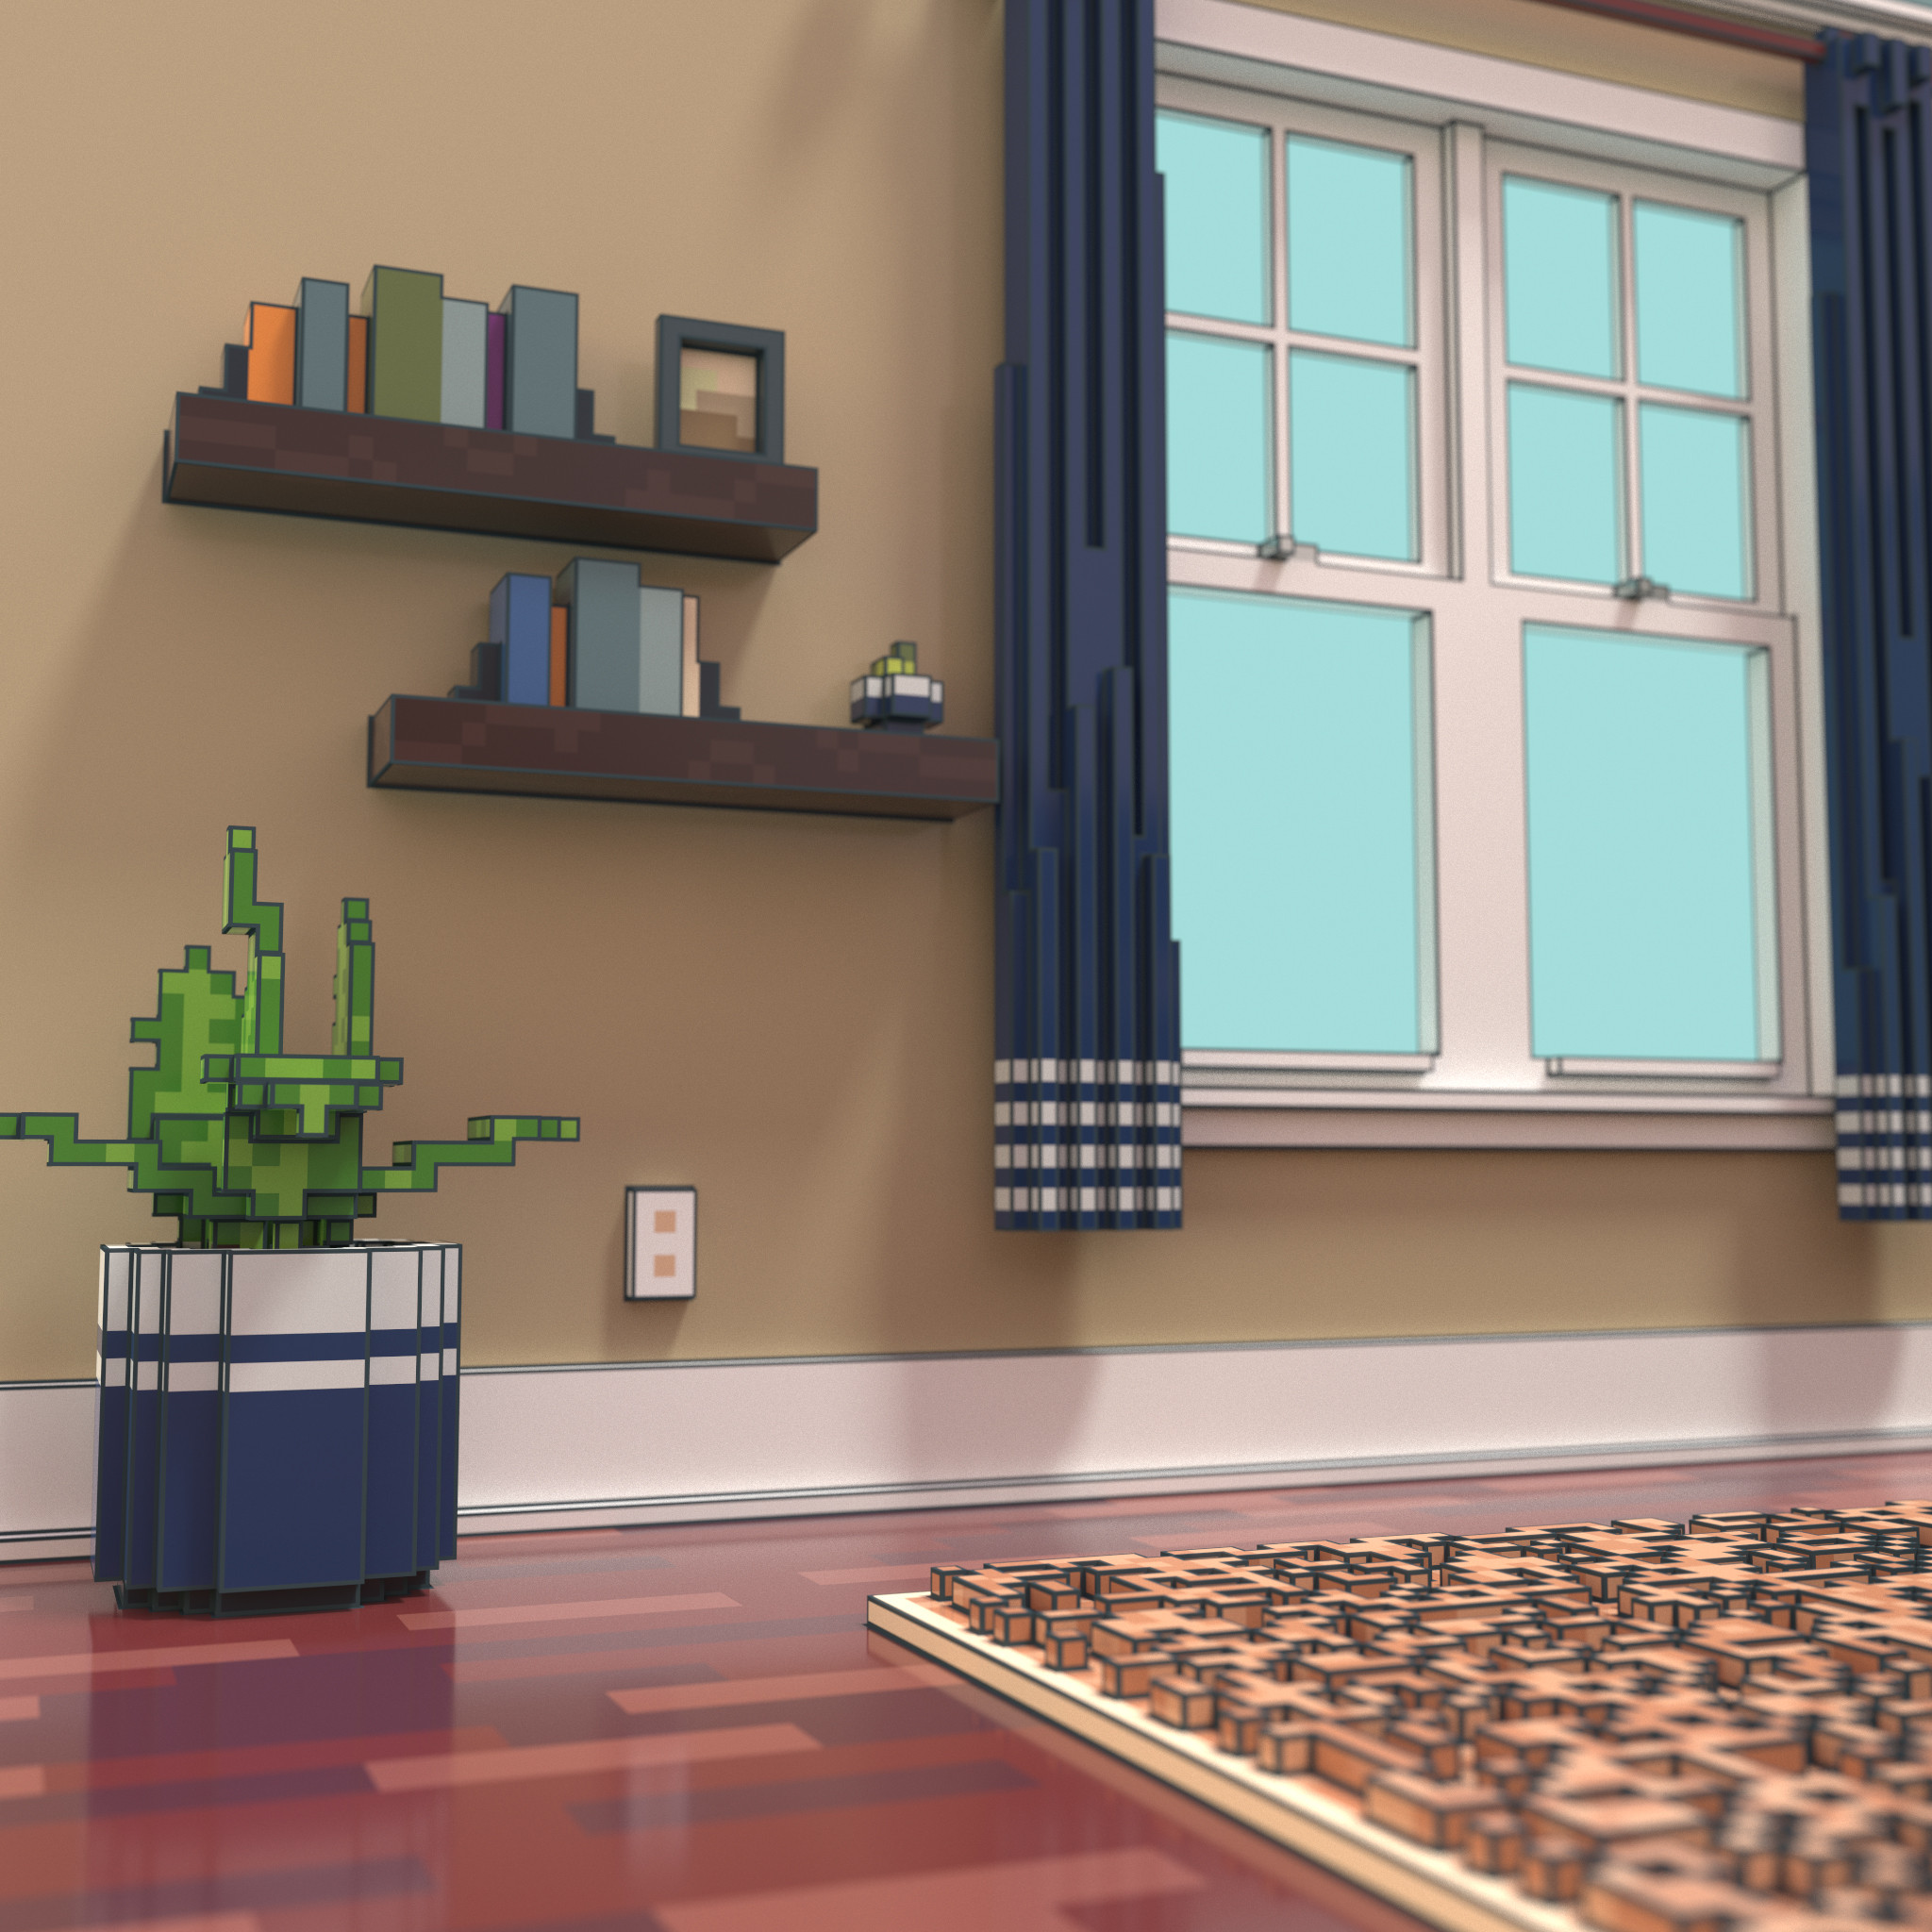 Voxel model of a home office potted plant and built-in book shelving near a 2-bay window with navy blue curtains.